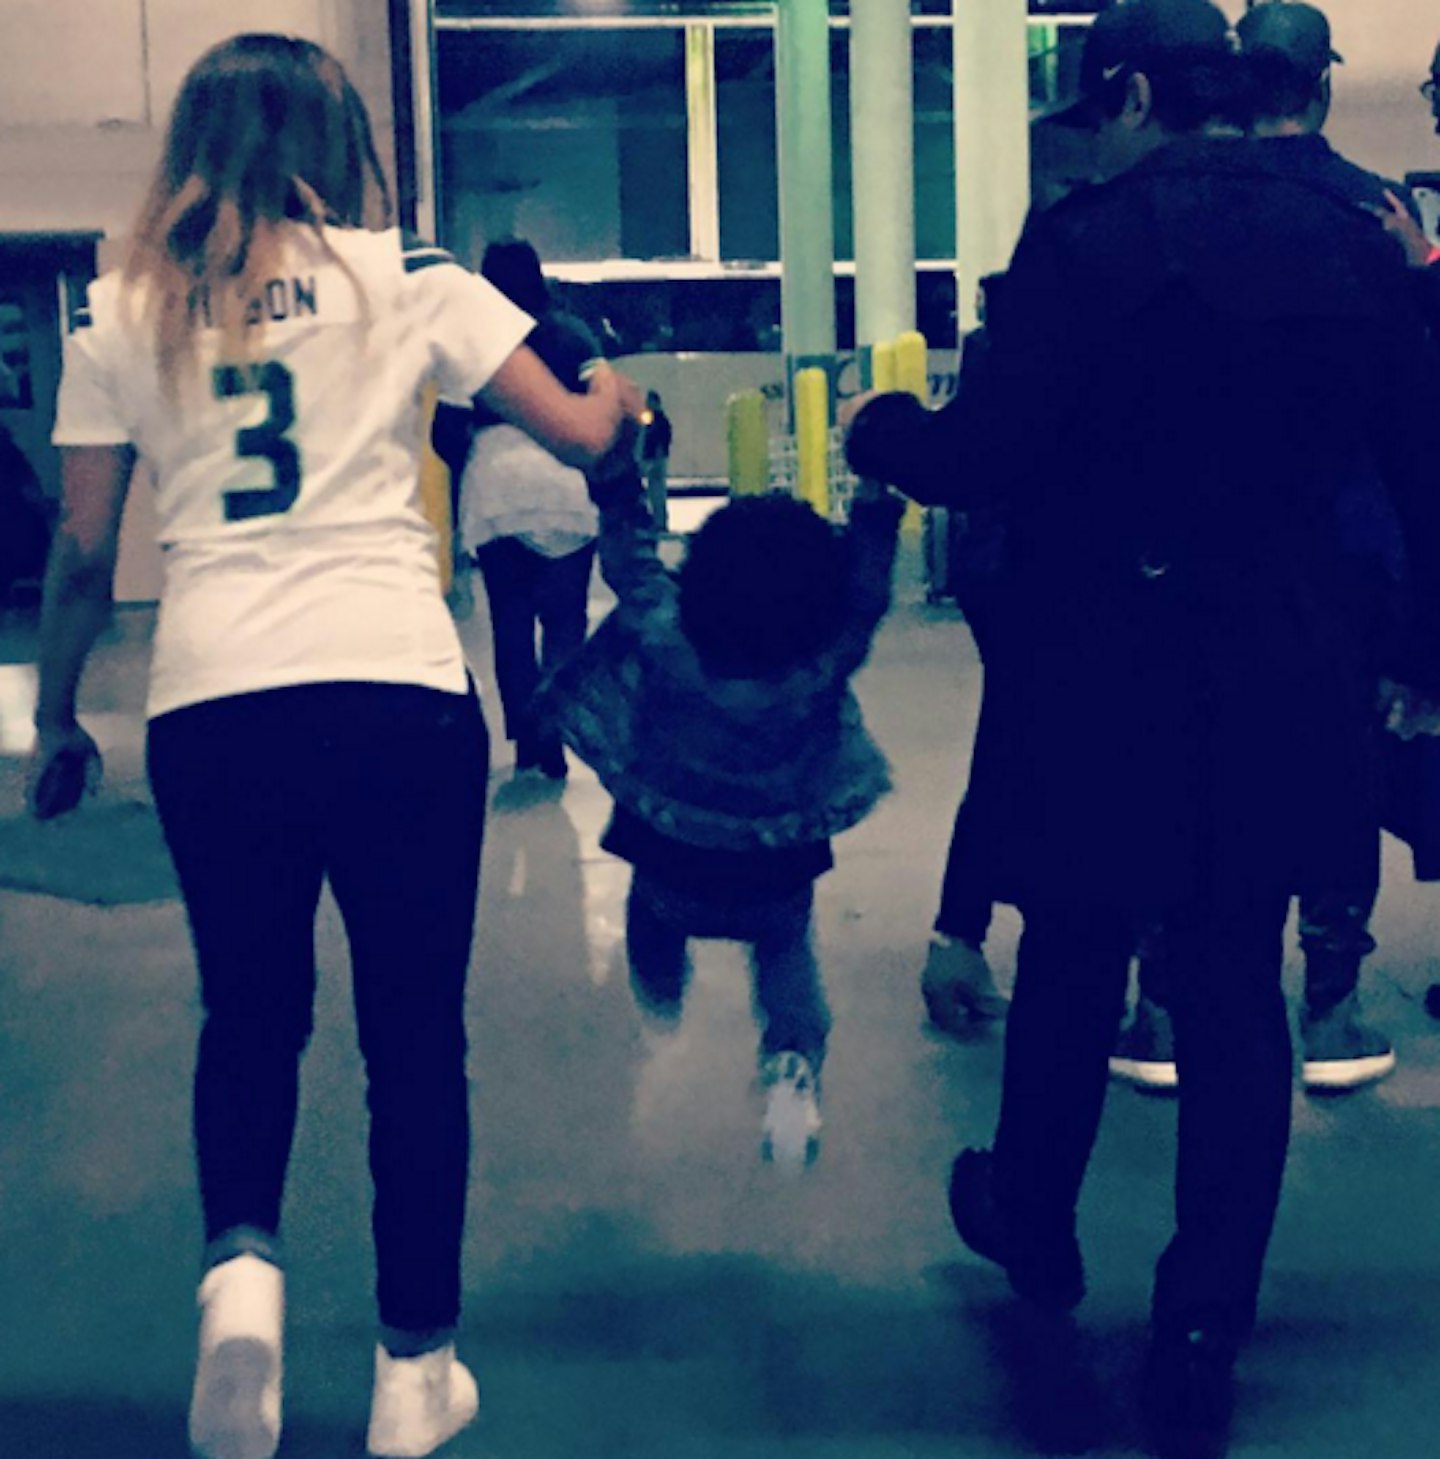 Ciara & Russell Wilson Are Building A Family & Legacy For The Ages